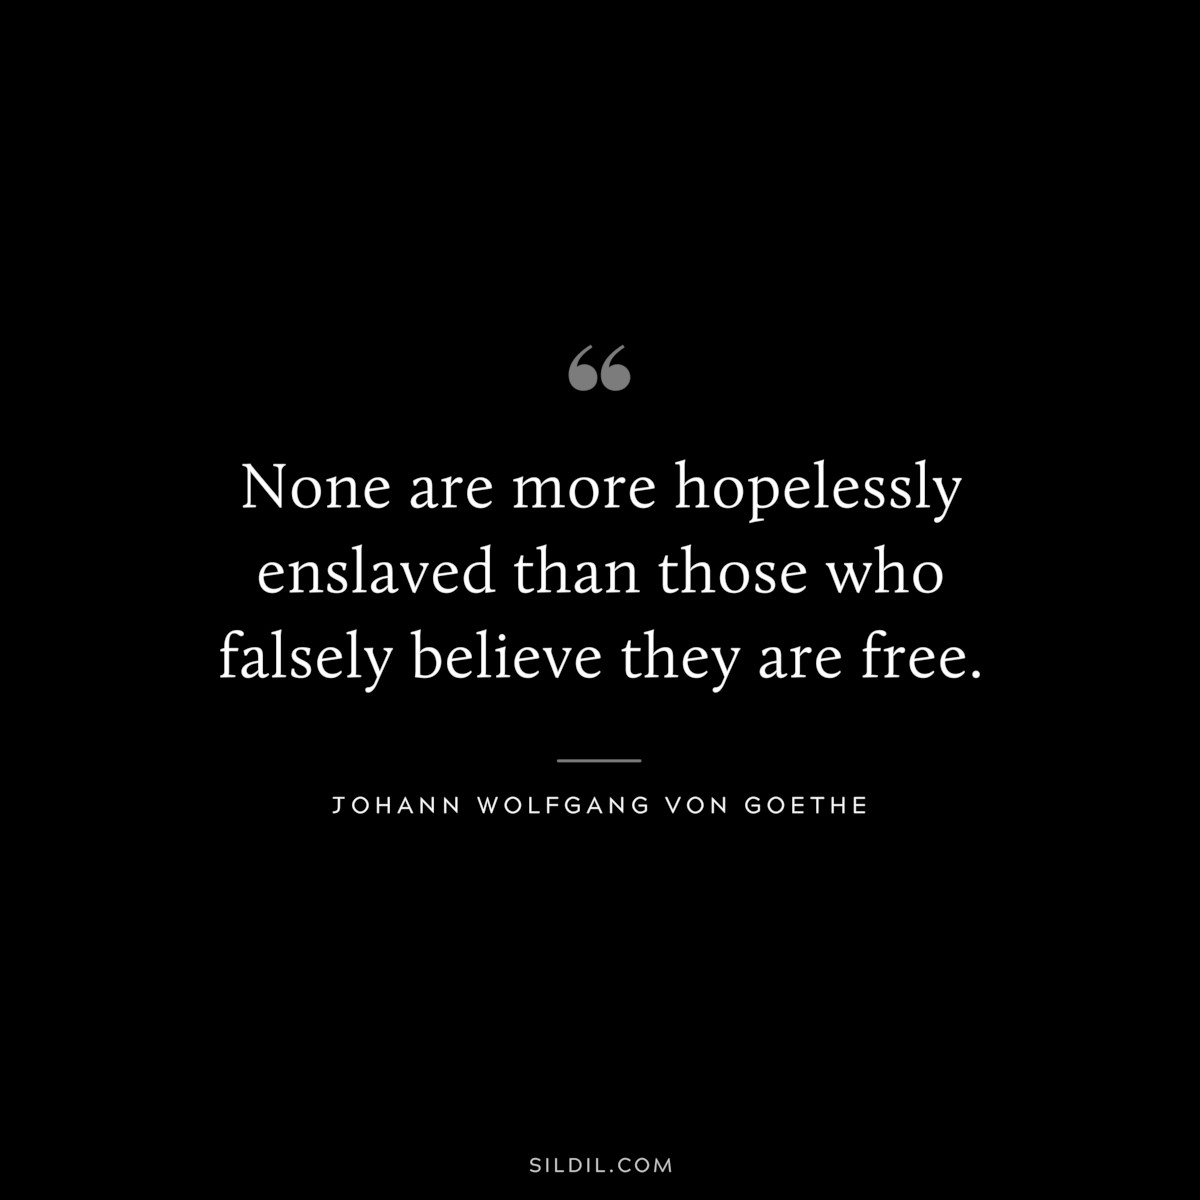 None are more hopelessly enslaved than those who falsely believe they are free.― Johann Wolfgang von Goethe